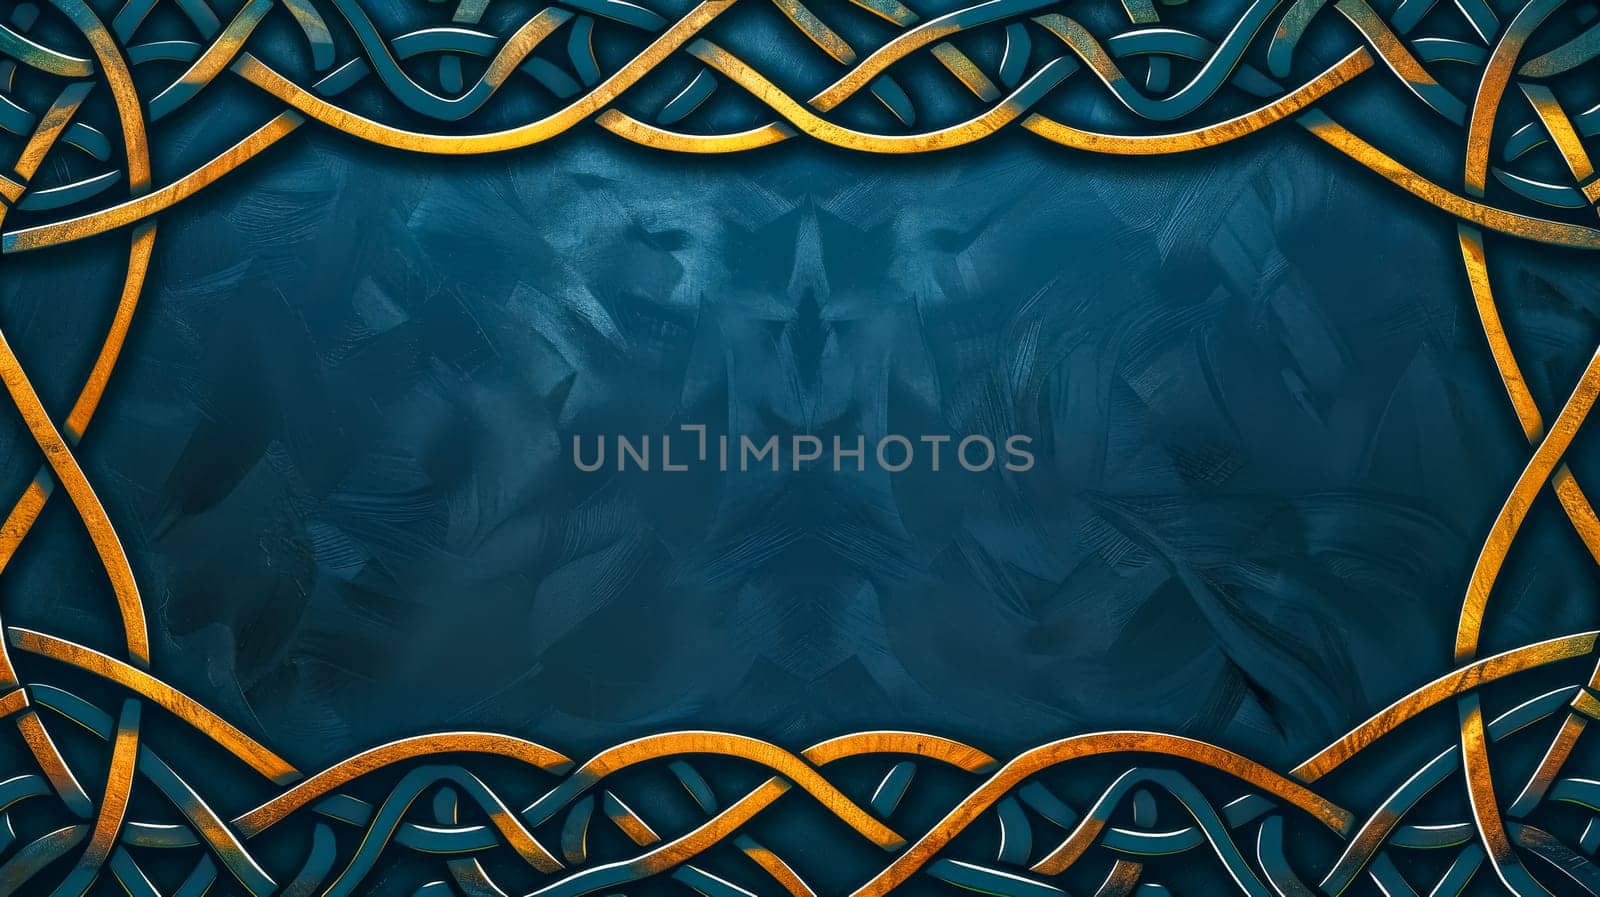 Luxurious dark blue background decorated with feathers and an intricate golden frame design